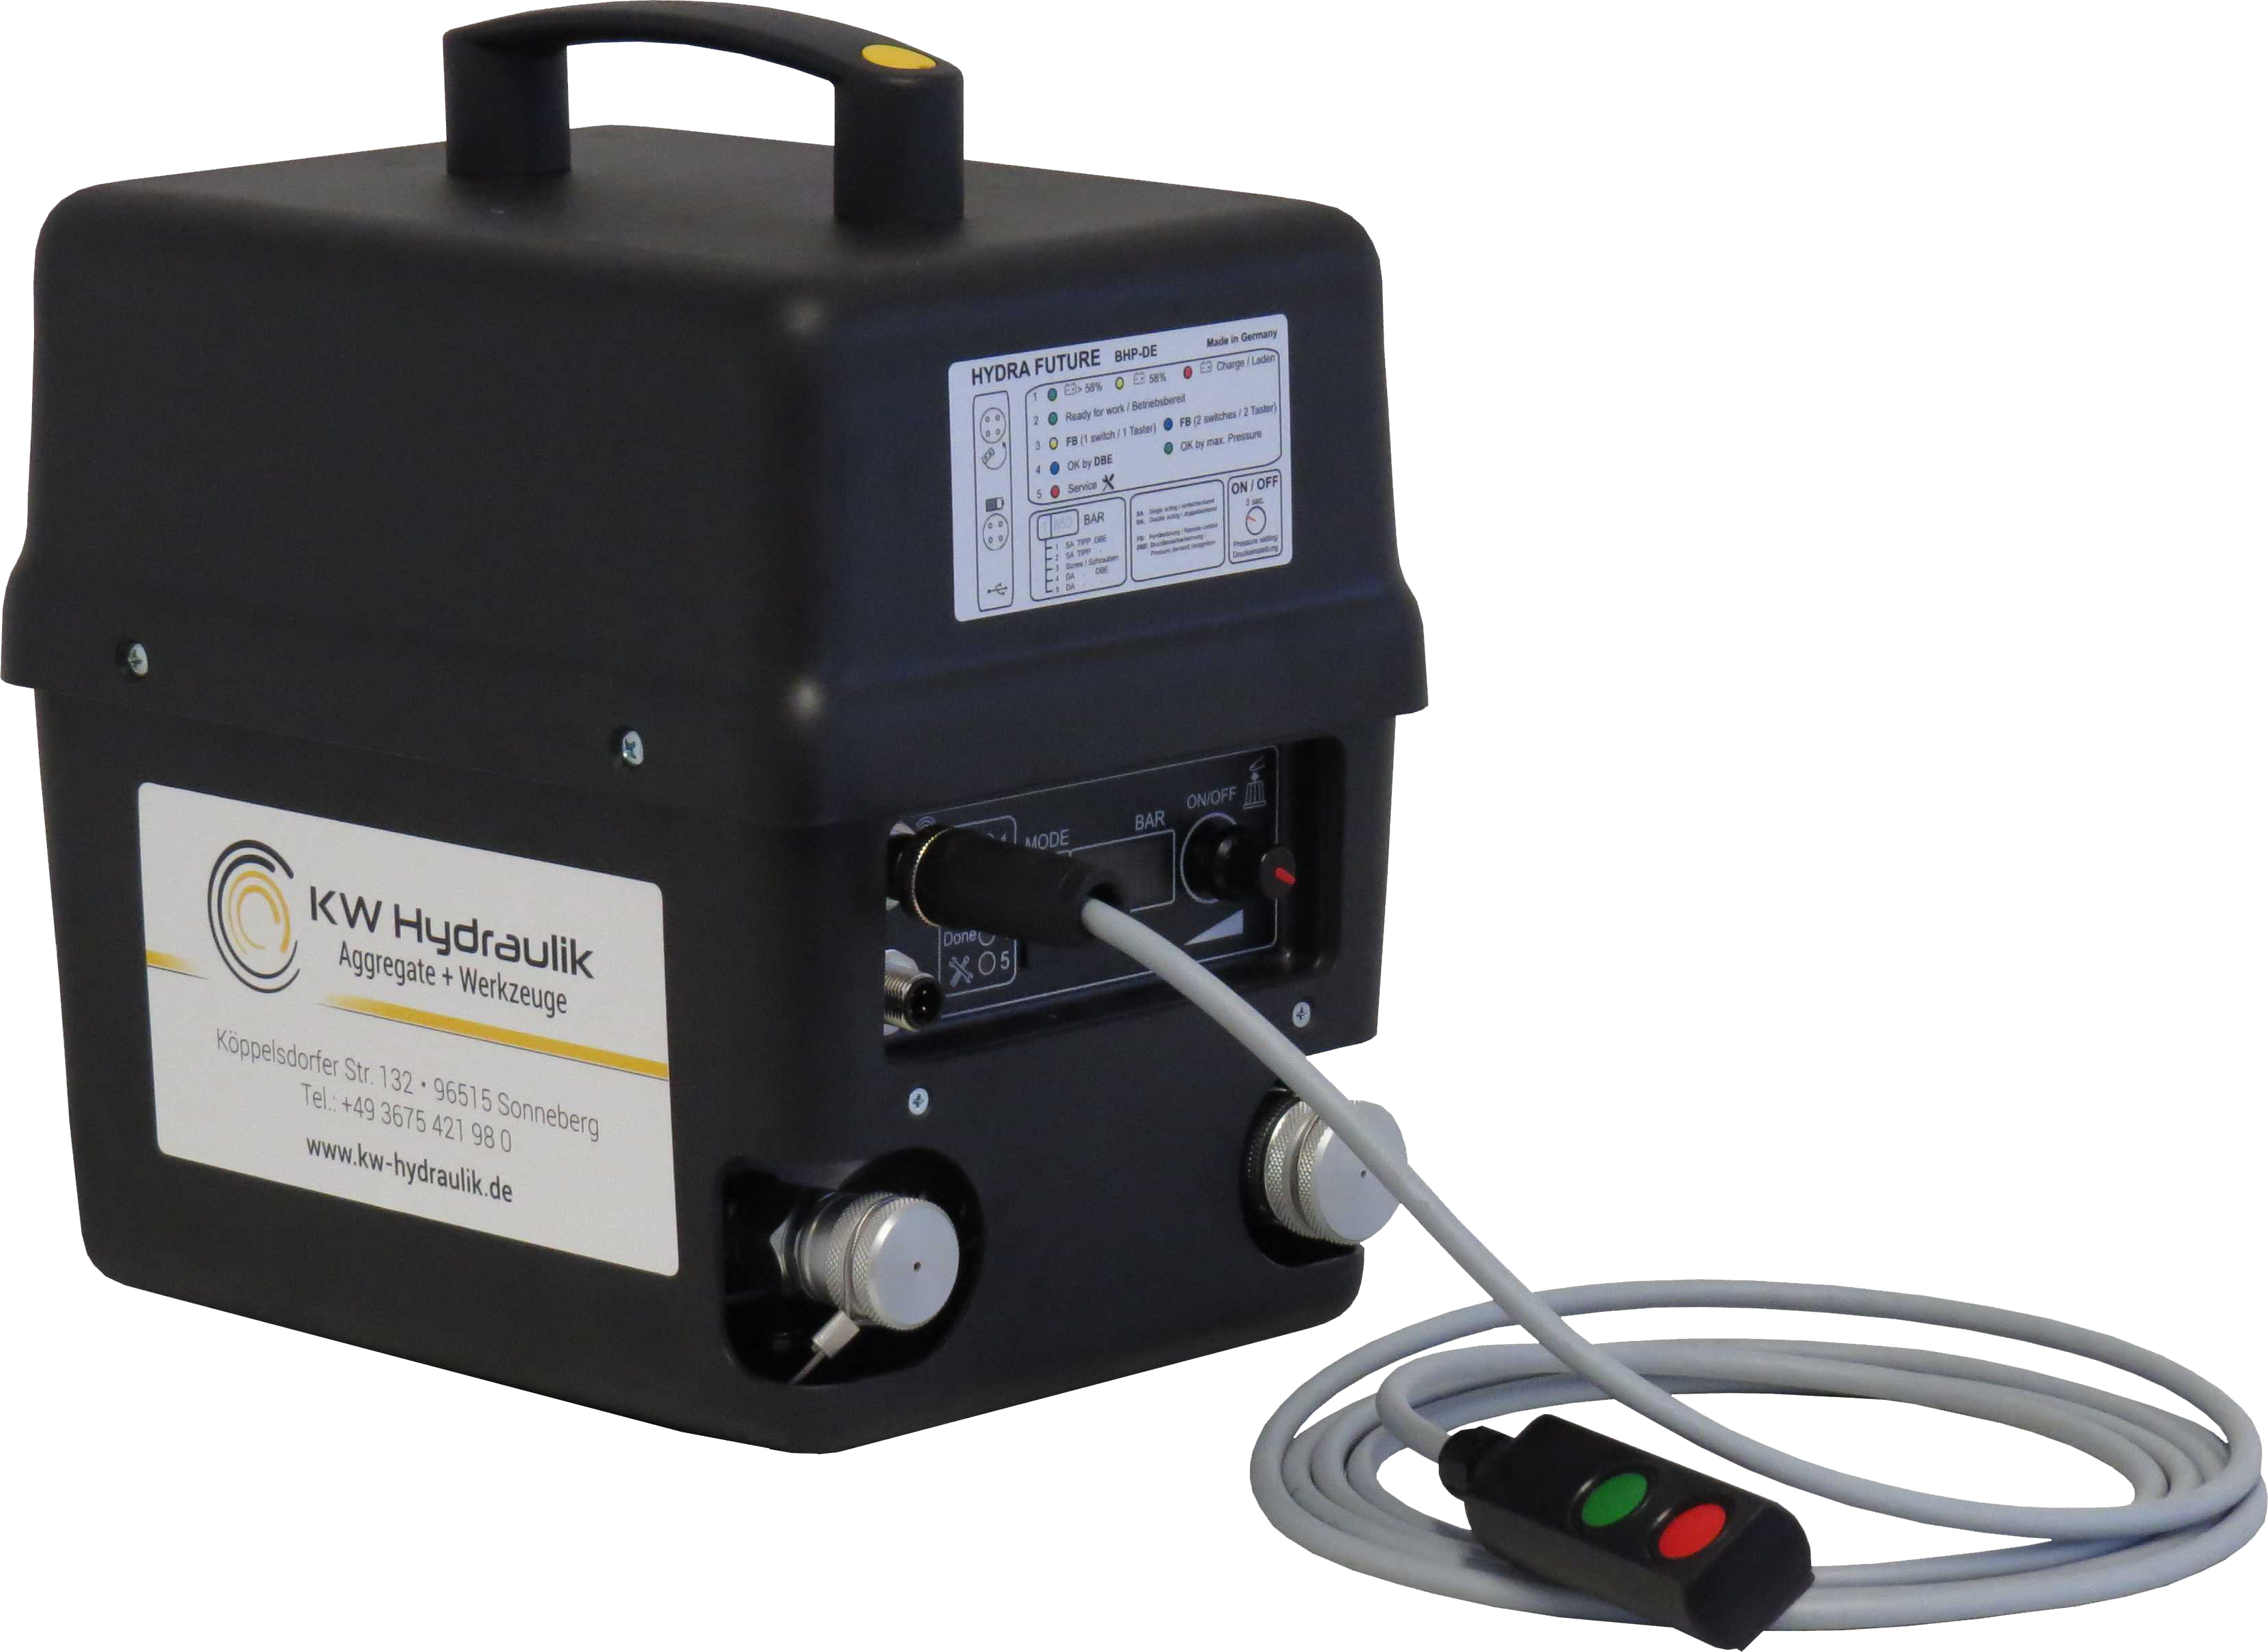 BHP-DE-1kW-4Ah - HYDRA FUTURE - Battery hydraulic pump with integrated battery for double-acting tools